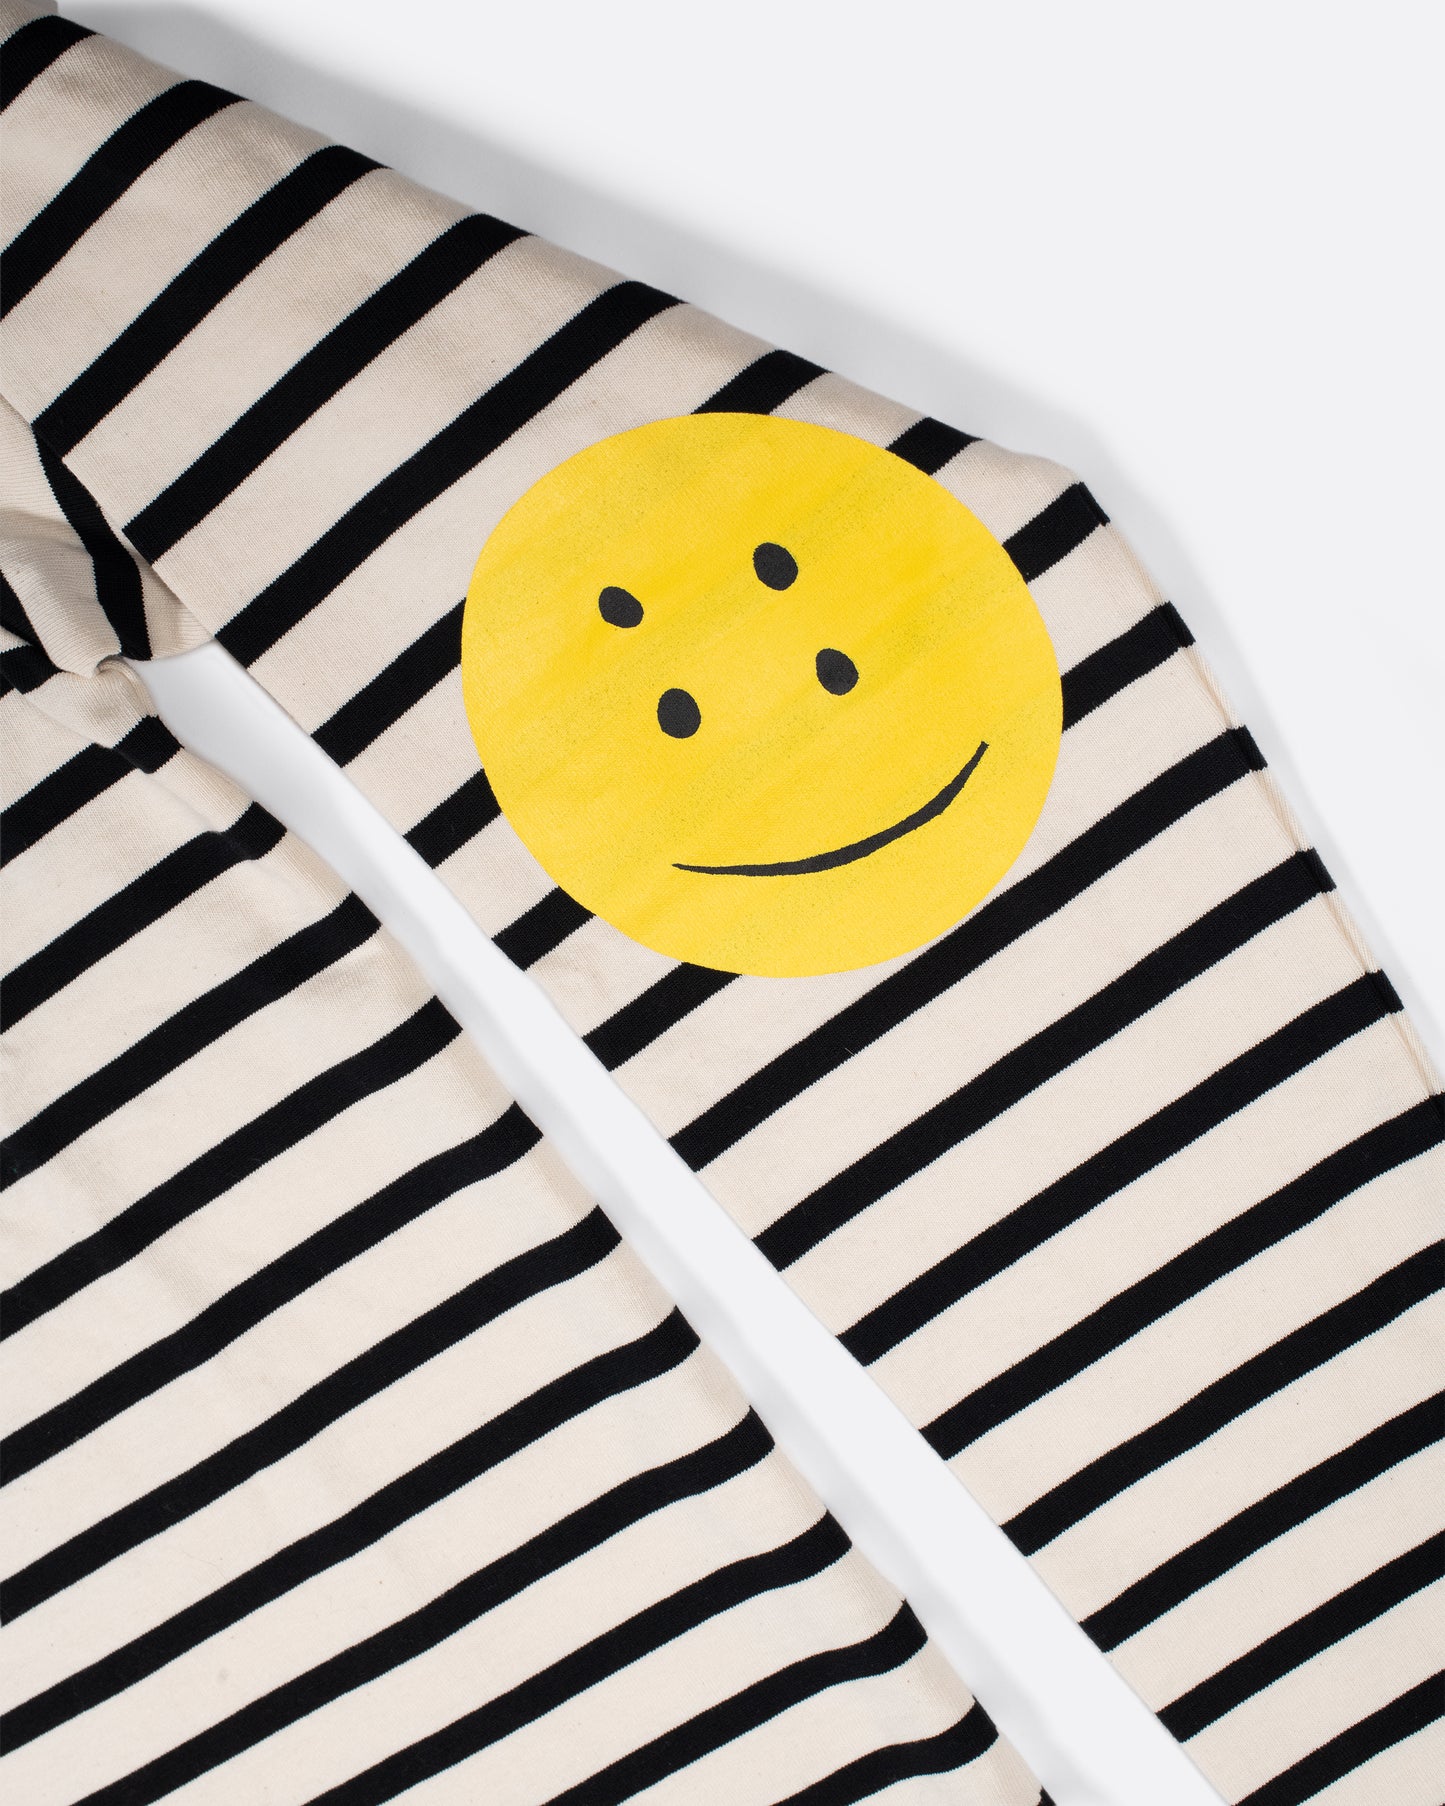 A black and white striped, cotton, crewneck shirt with Kapital's fan favorite rainbow smiley elbow patches.